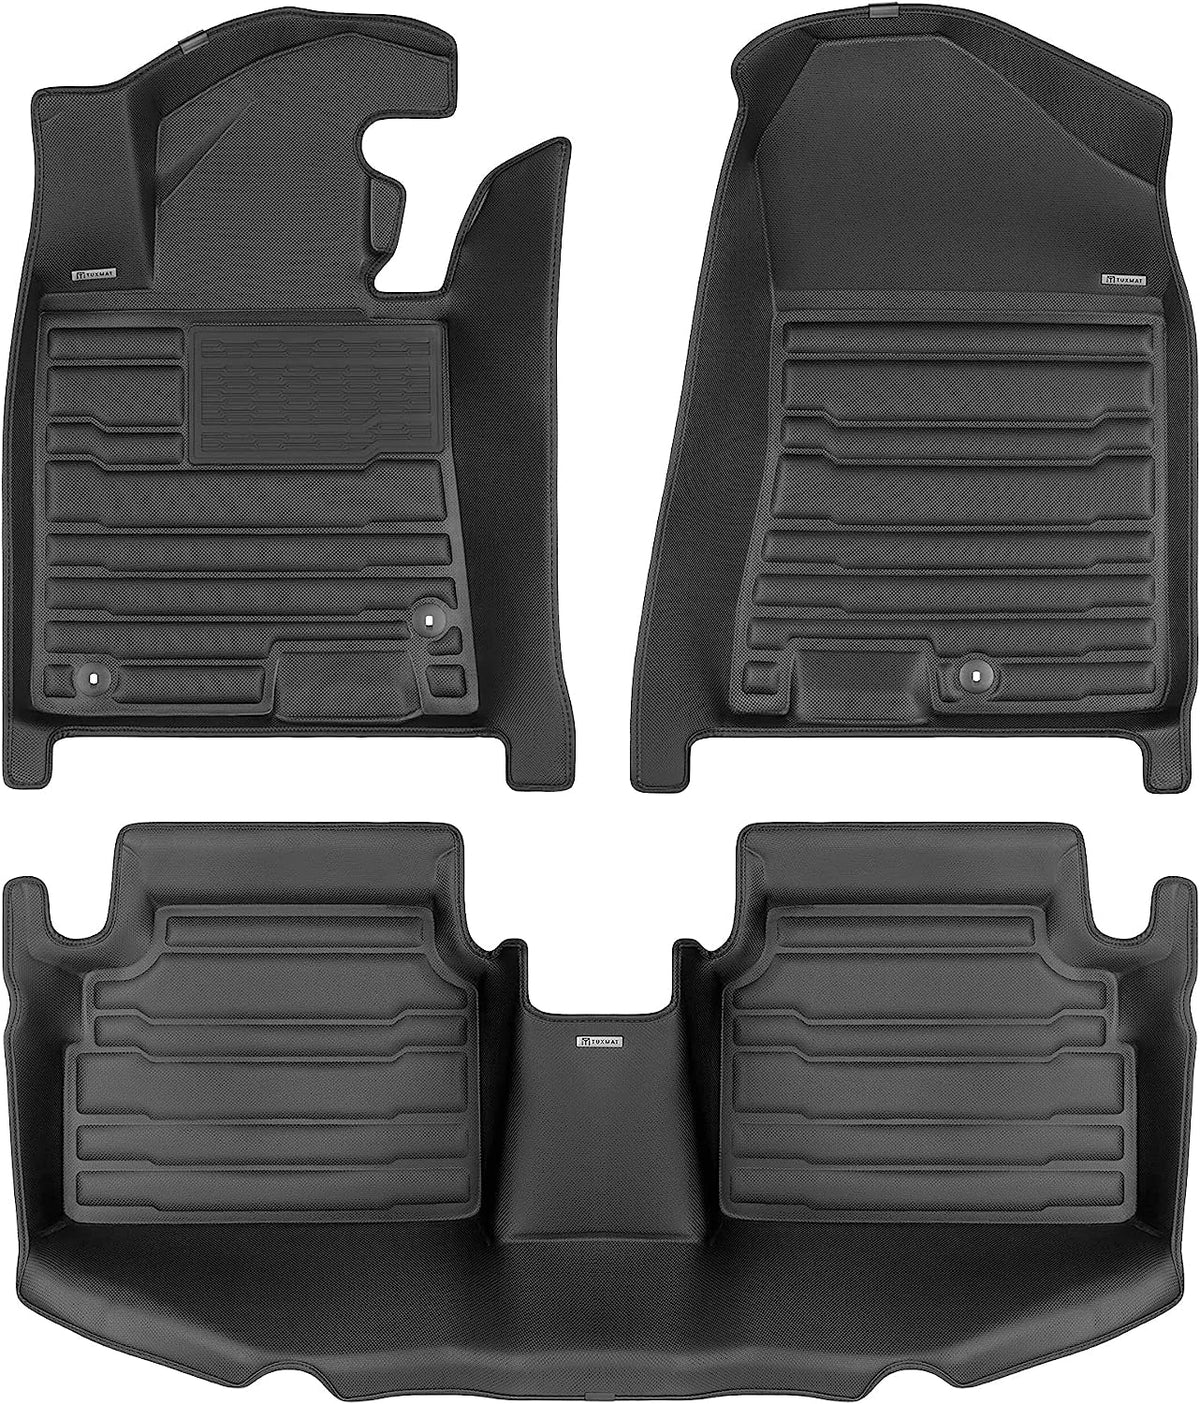 TuxMat 8525  - for Hyundai Sonata 2020-2023 Models - Custom Car Mats - Maximum Coverage, All Weather, Laser Measured - This Full Set Includes 1st and 2nd Rows